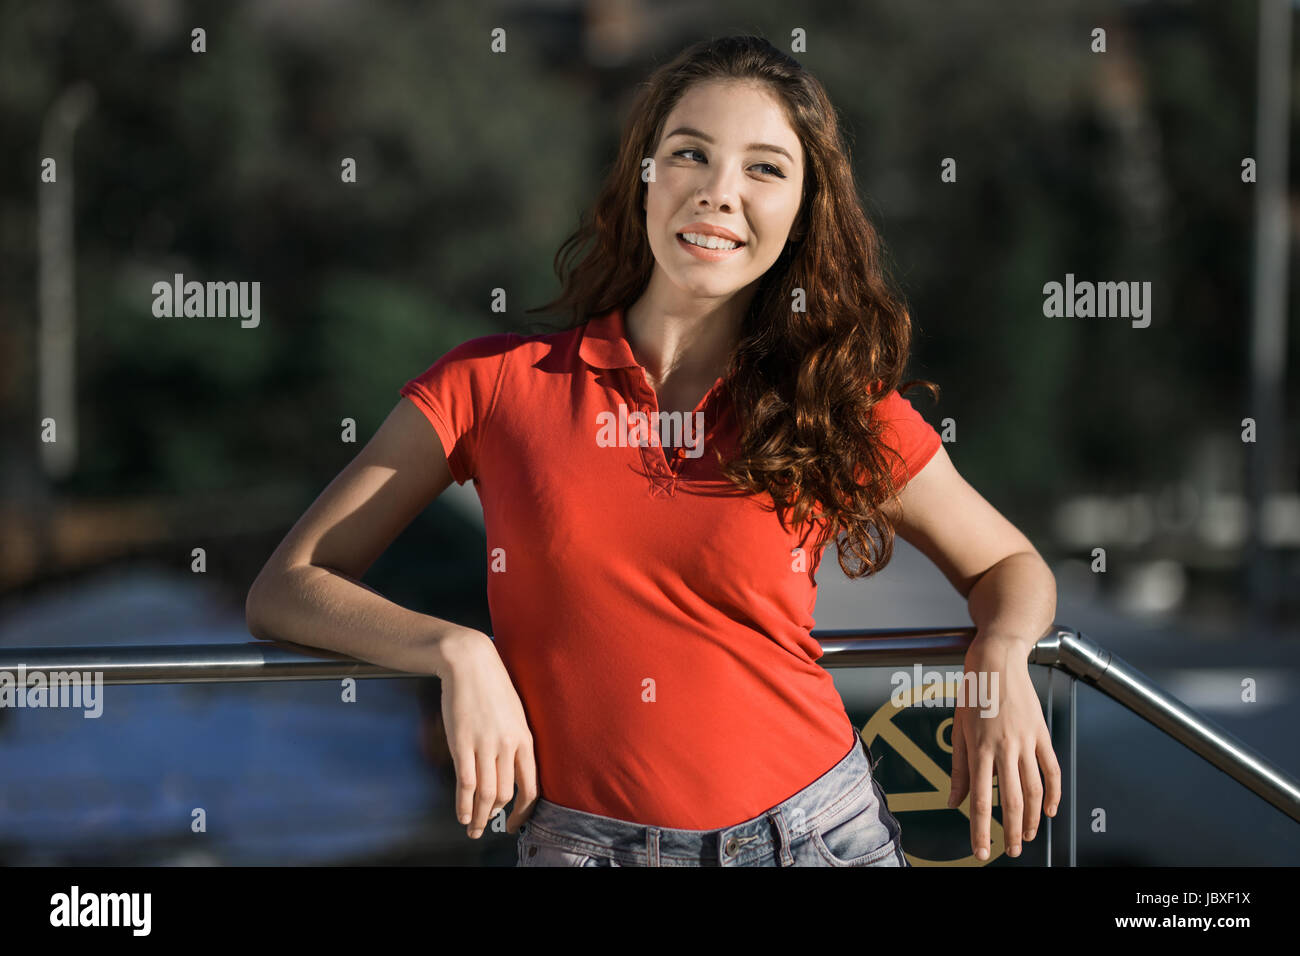 Summer sunny lifestyle fashion portrait of young woman posing in the city Stock Photo